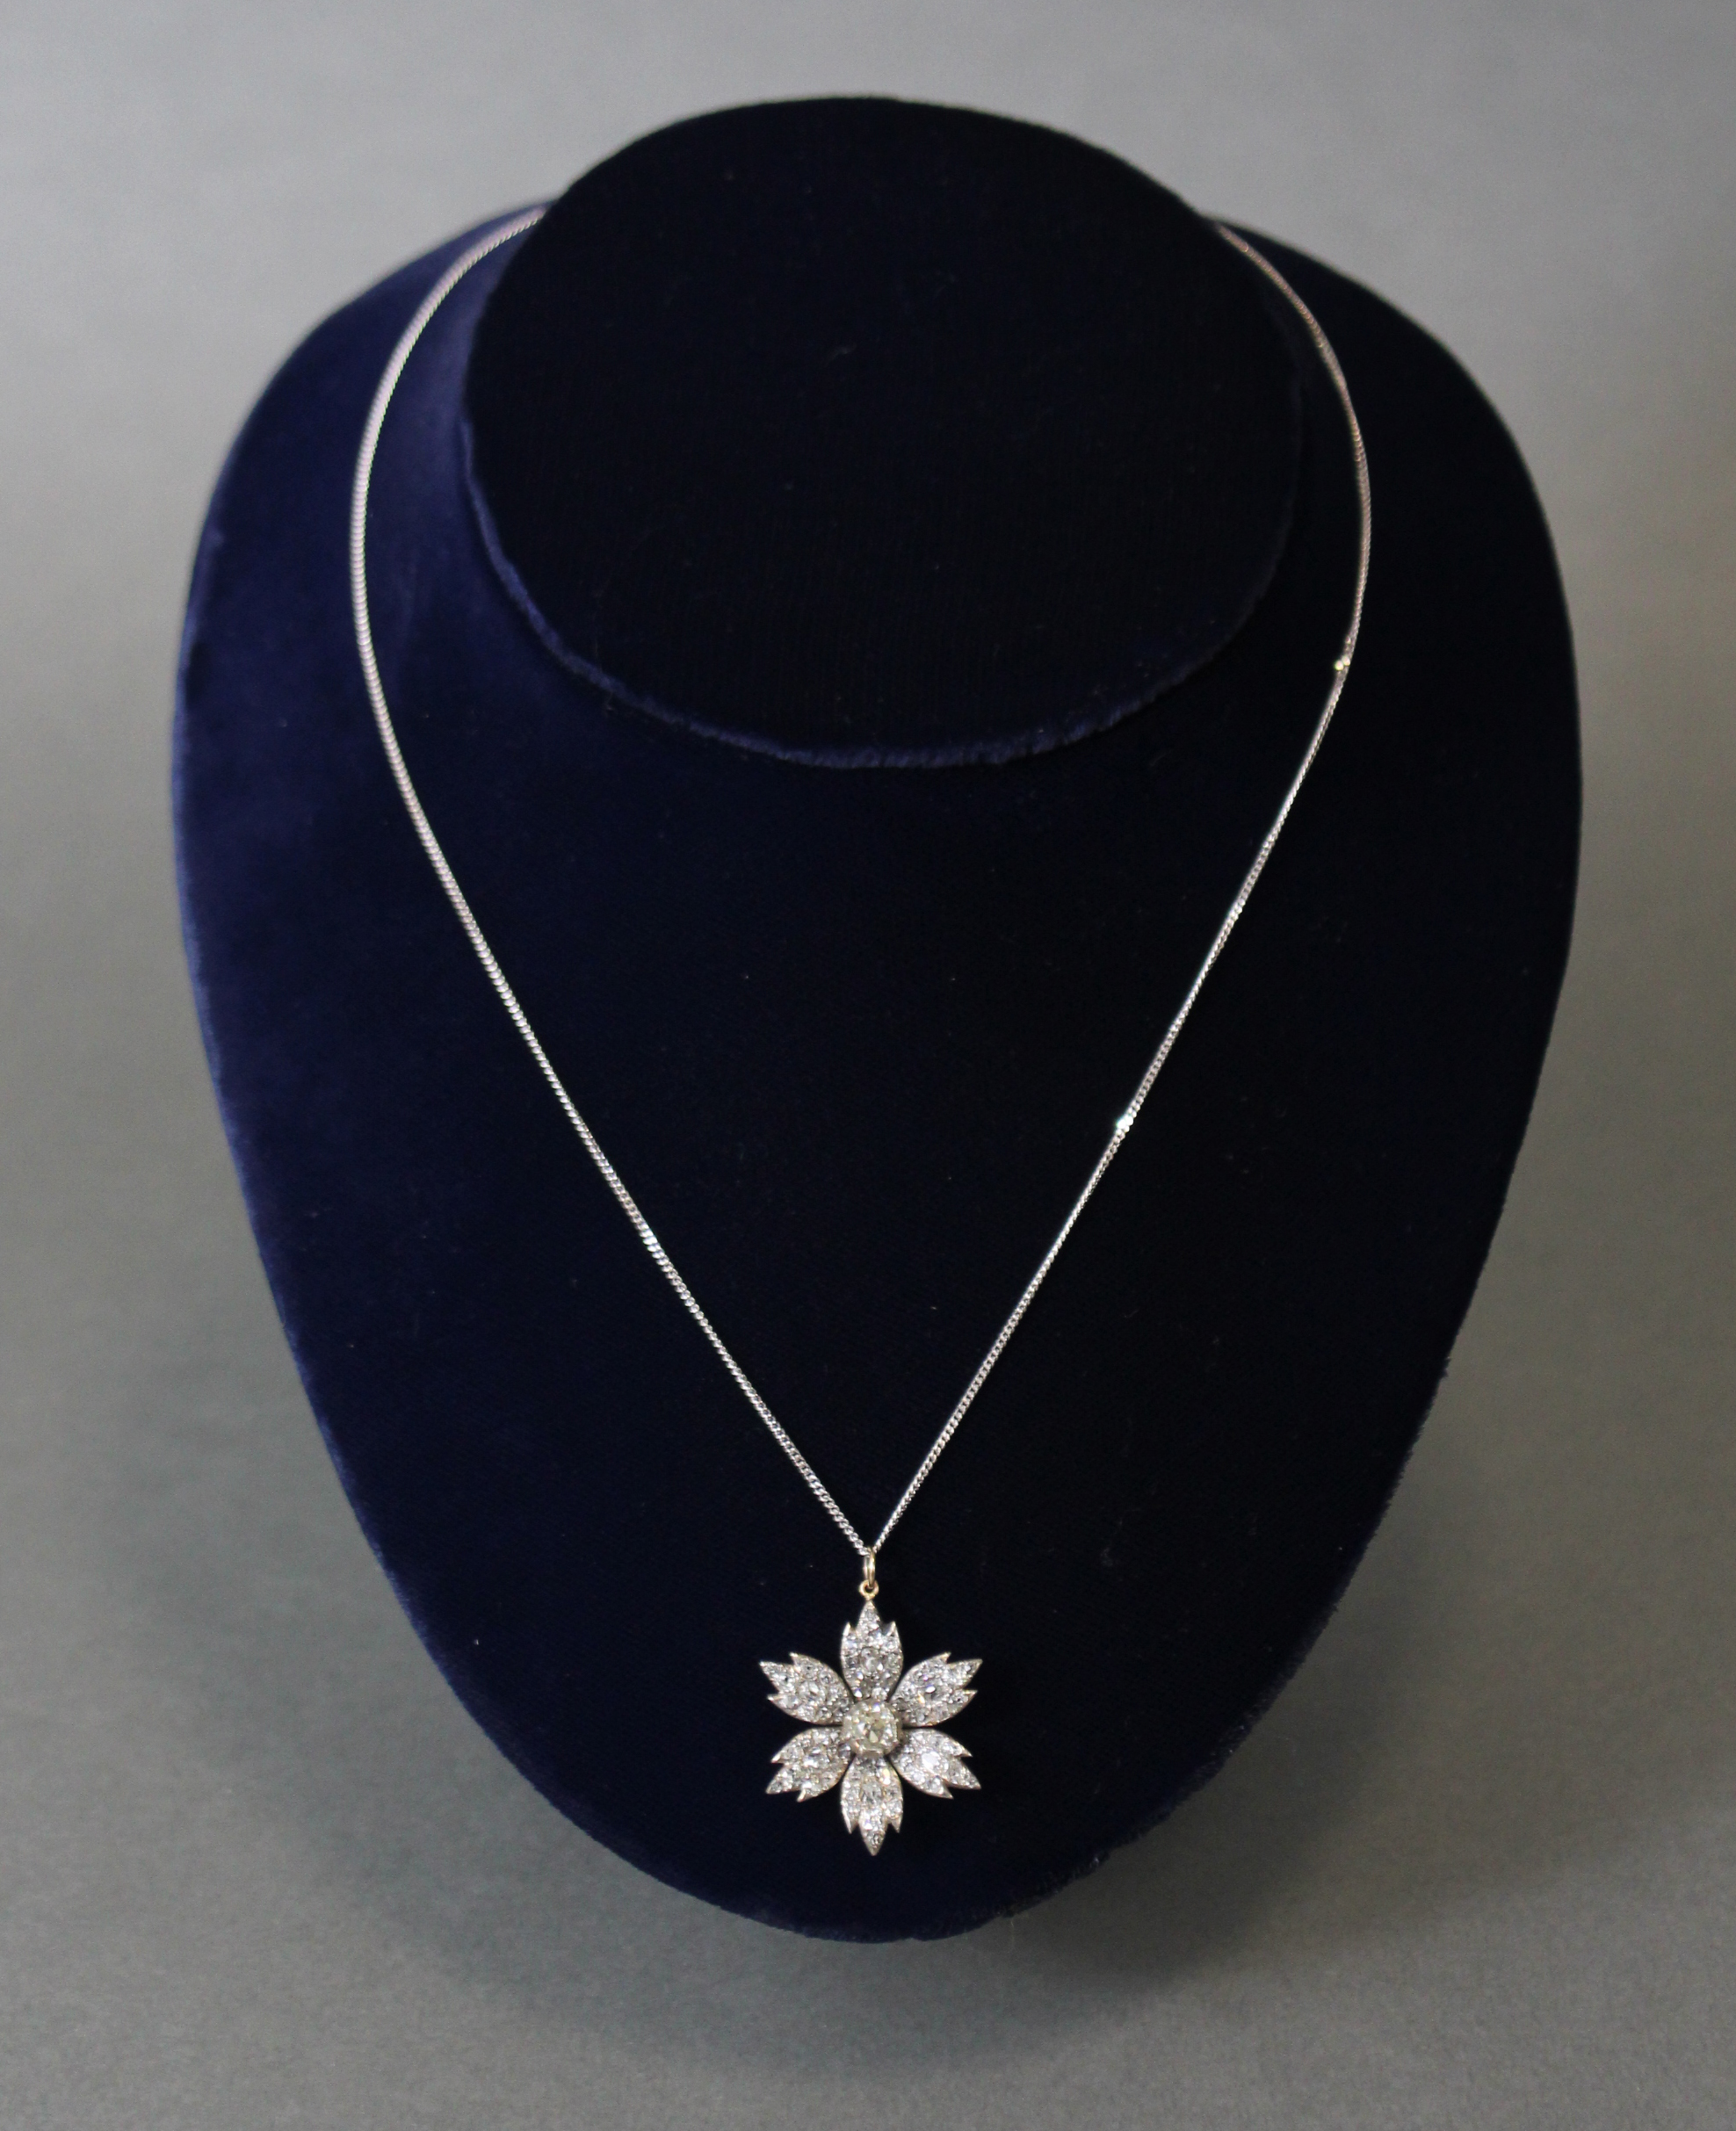 A DIAMOND FLOWER-HEAD PENDANT, the centre stone approximately 0.5 carat, surrounded by six petals - Image 3 of 5